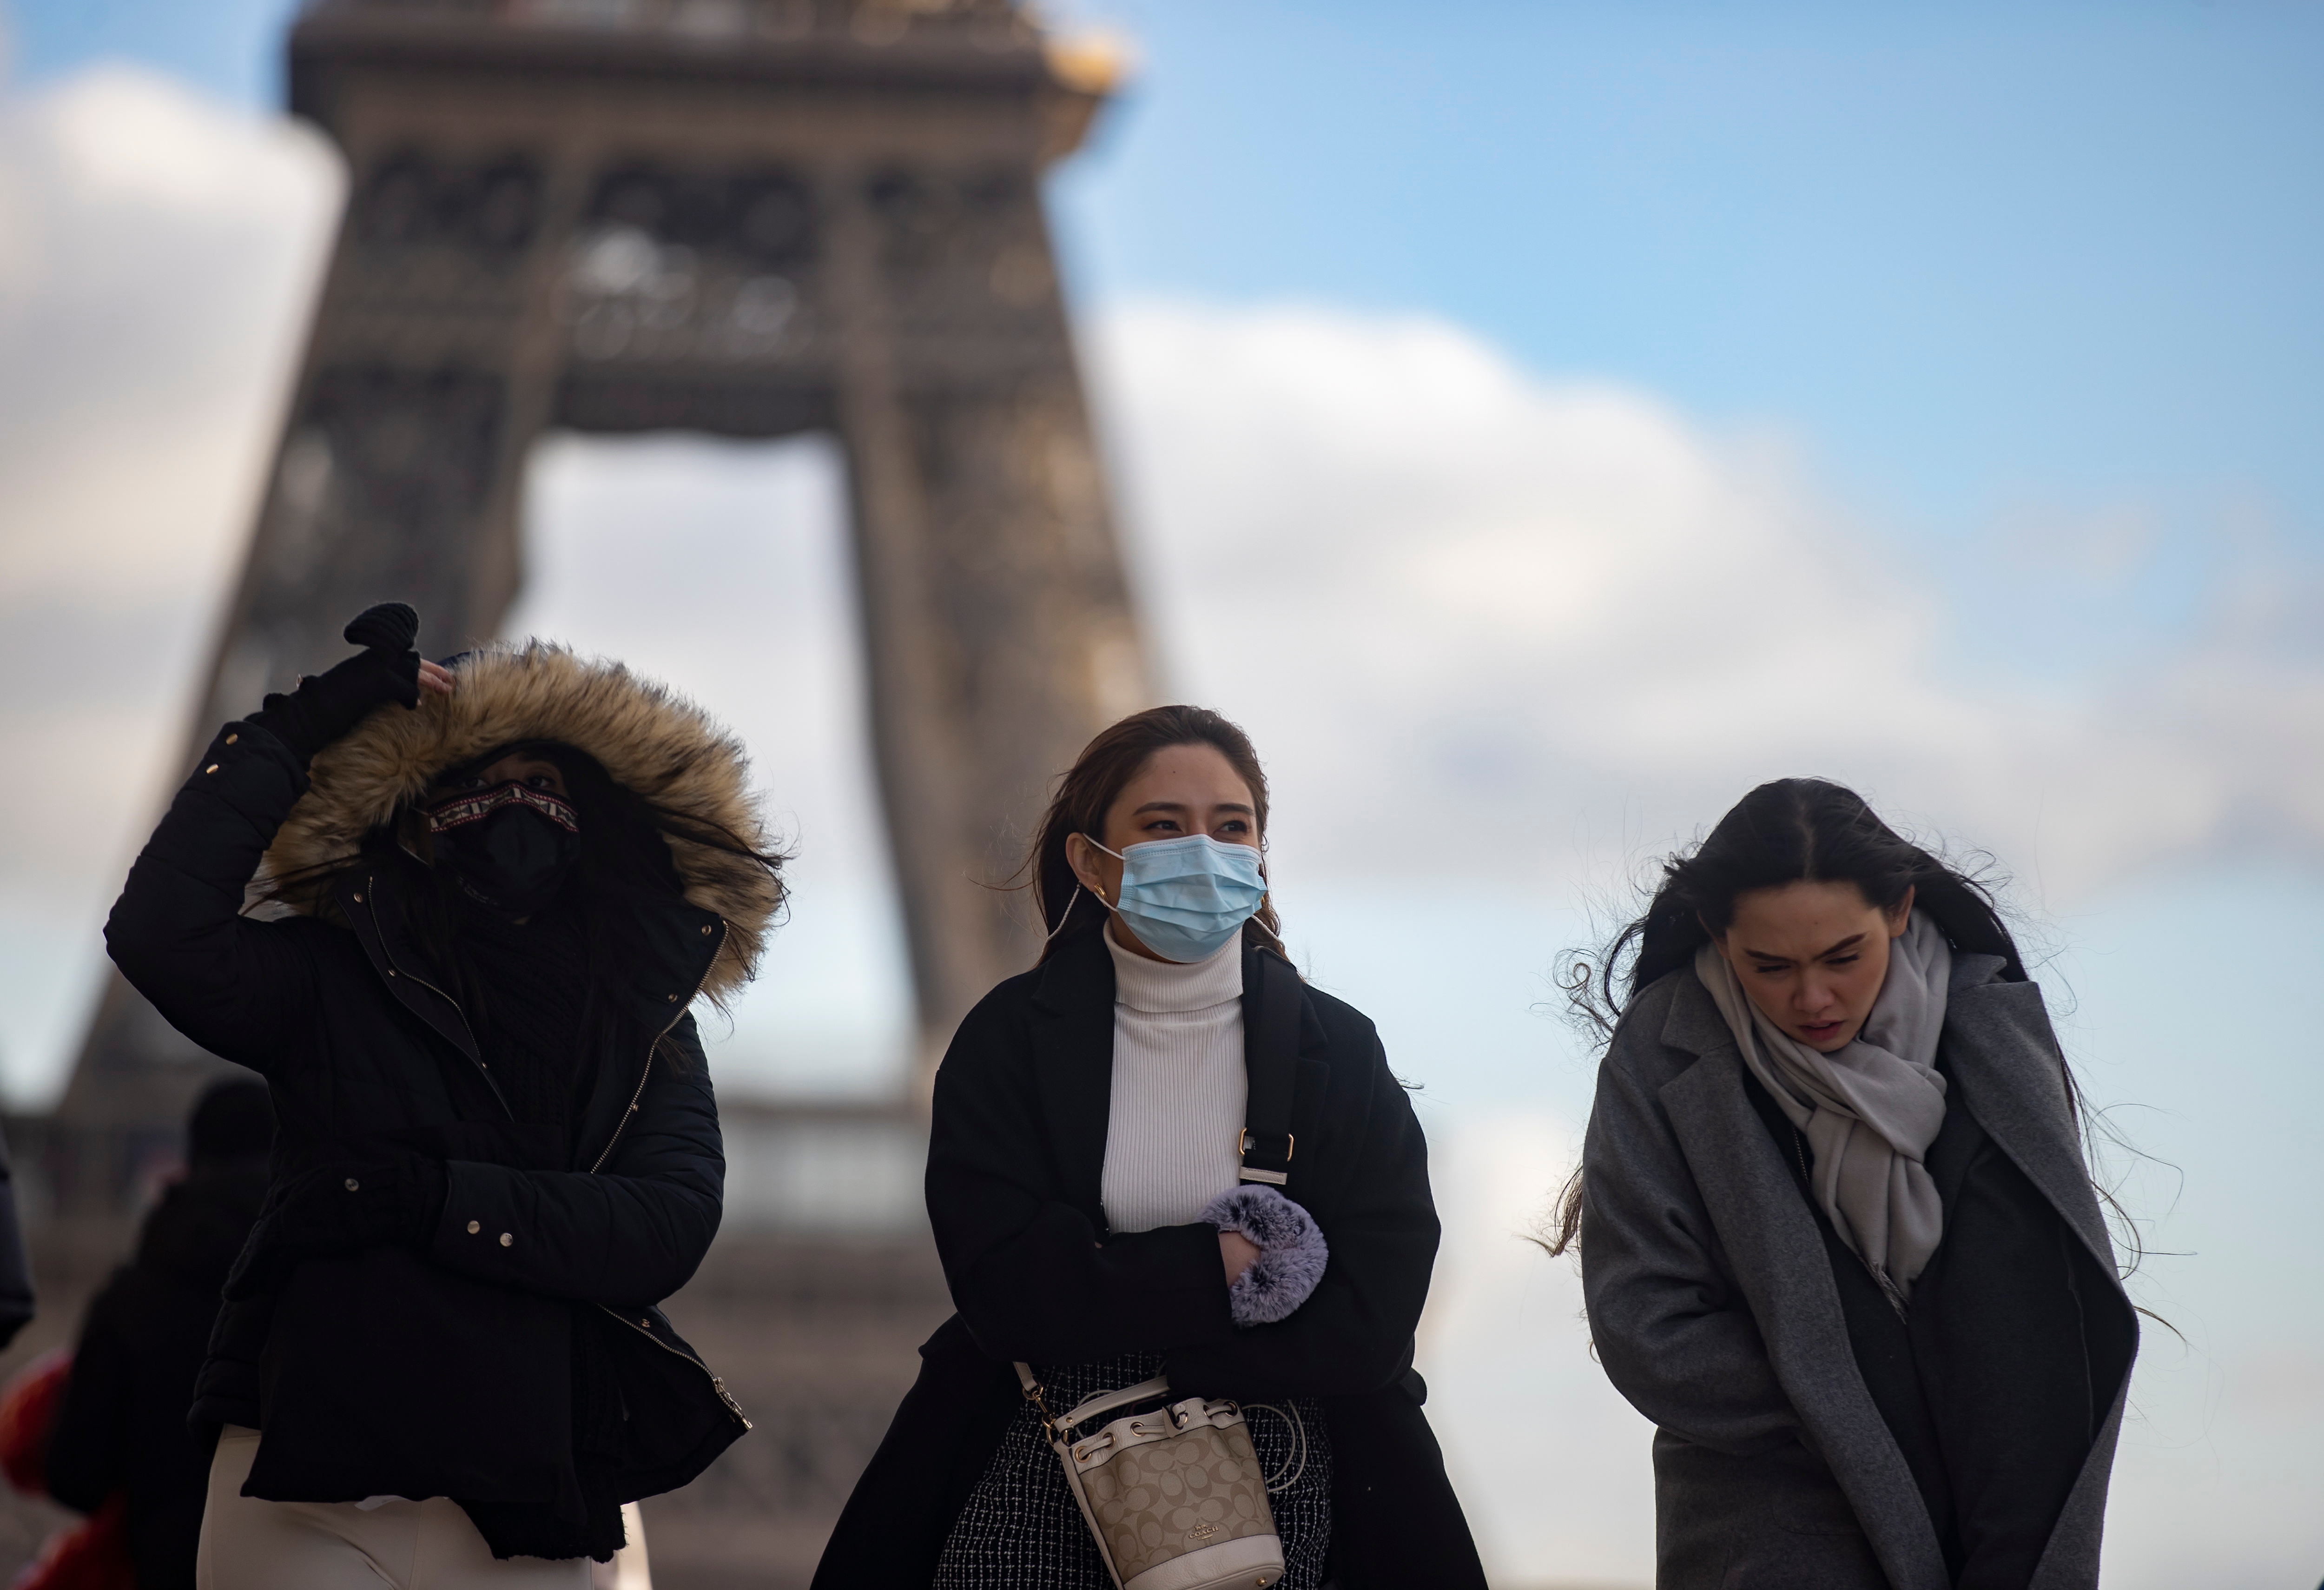 A group of young people walk around wearing a mask in Paris, with the Eiffel Tower in the background.  EFE/EPA/IAN LANGSDON